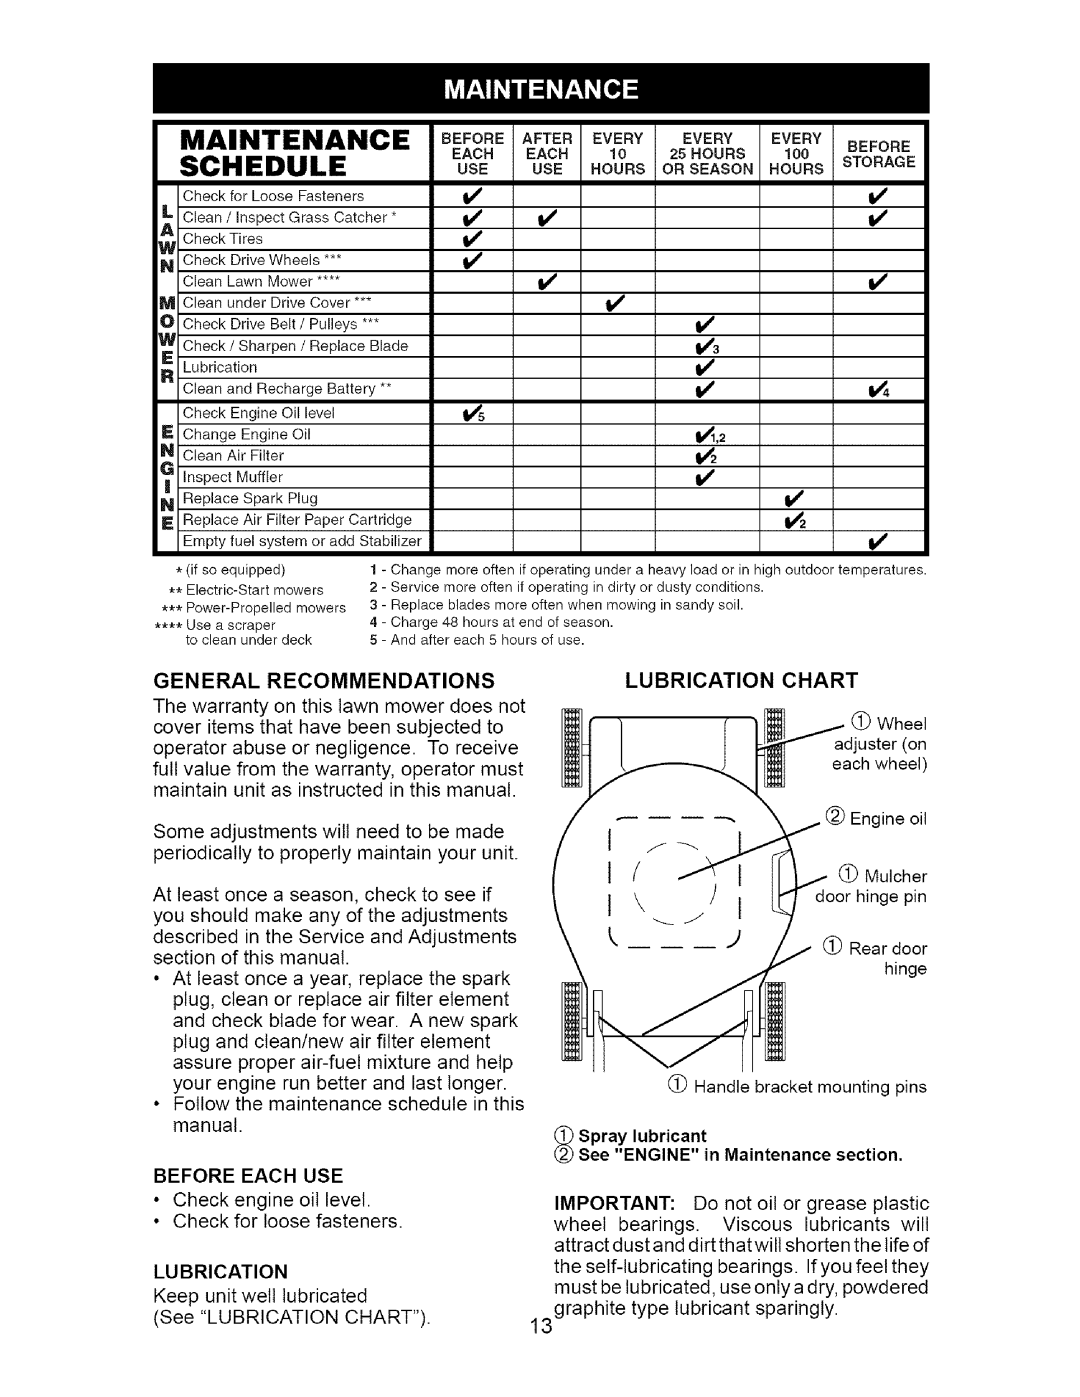 Craftsman 917.370741 owner manual Schedule, Lubrication Chart 